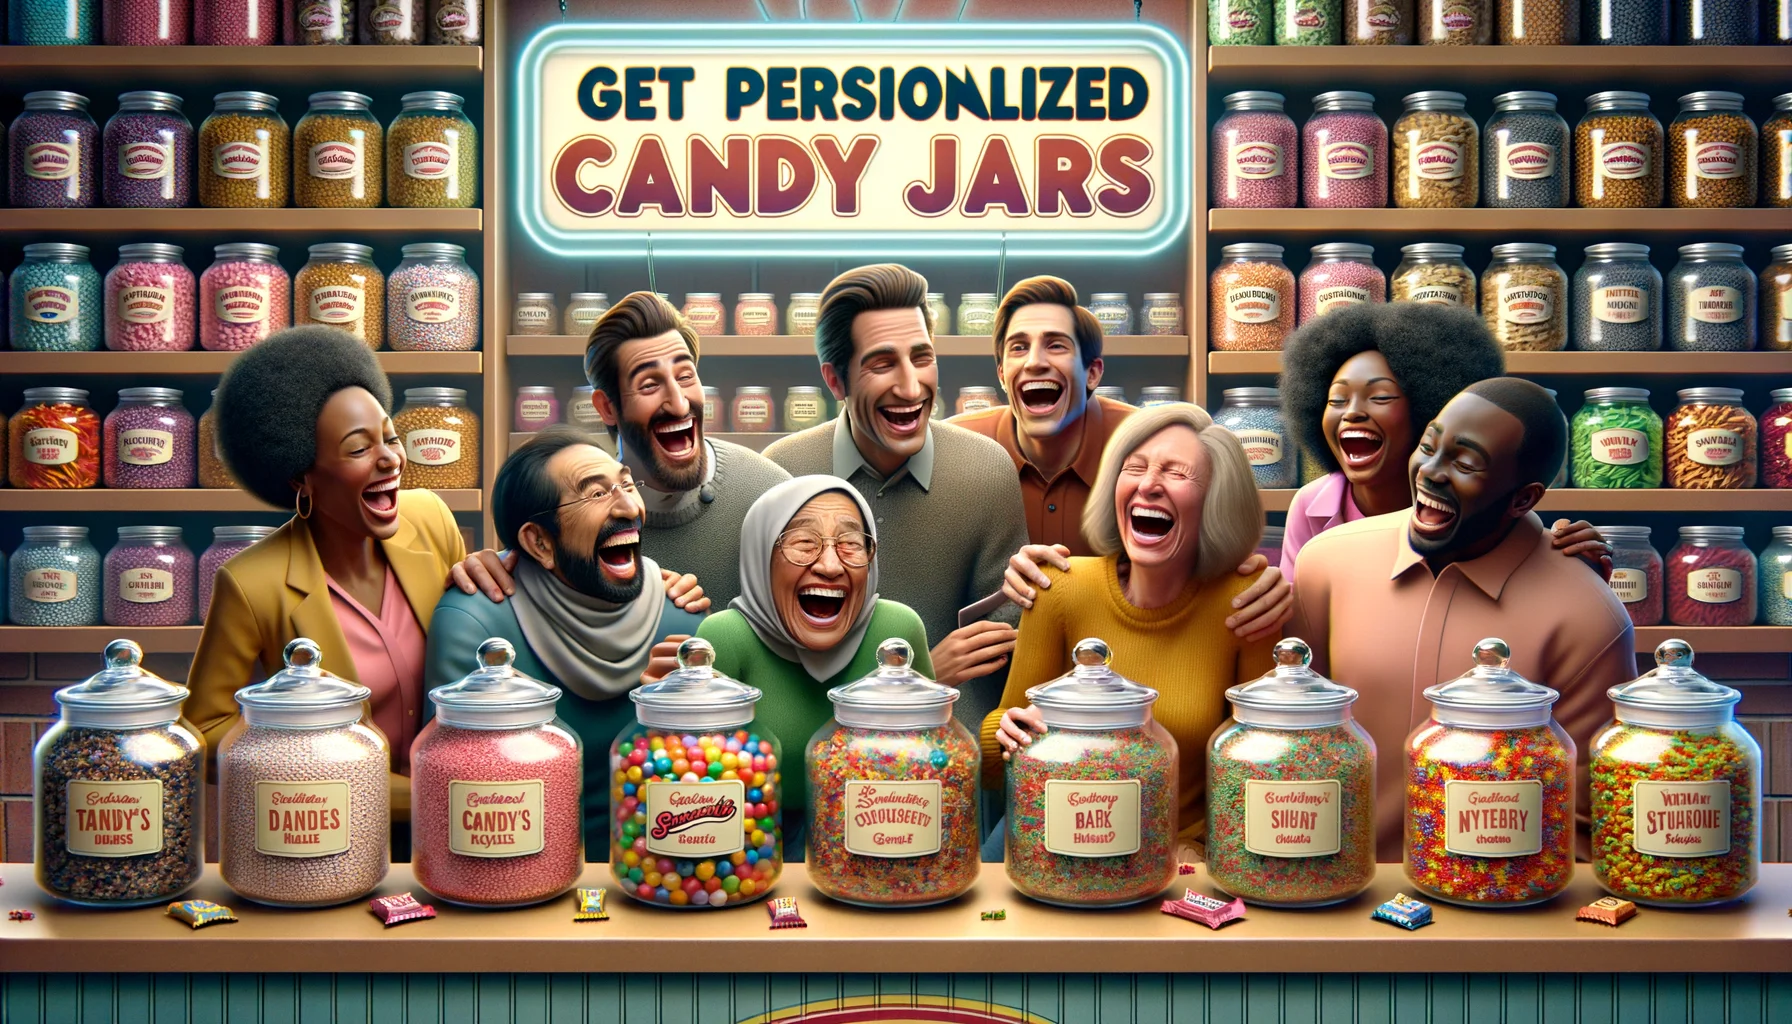 Imagine a humorous and lifelike scene in a candy store. There are shelves loaded with different types of colorful candies. Amidst it all, a central counter stands out with personalized candy jars arranged neatly. Each jar has a unique label displaying the name of the customer on a colorful sticker. A group of people, a Hispanic man, a Middle-Eastern woman, a Caucasian boy, and a Black woman are laughing out loud, excited about their jars filled with their favorite candies. The ambiance is energetic and festive. Enticing signage reads, 'Get Personalized Candy Jars' in bright, bold letters.